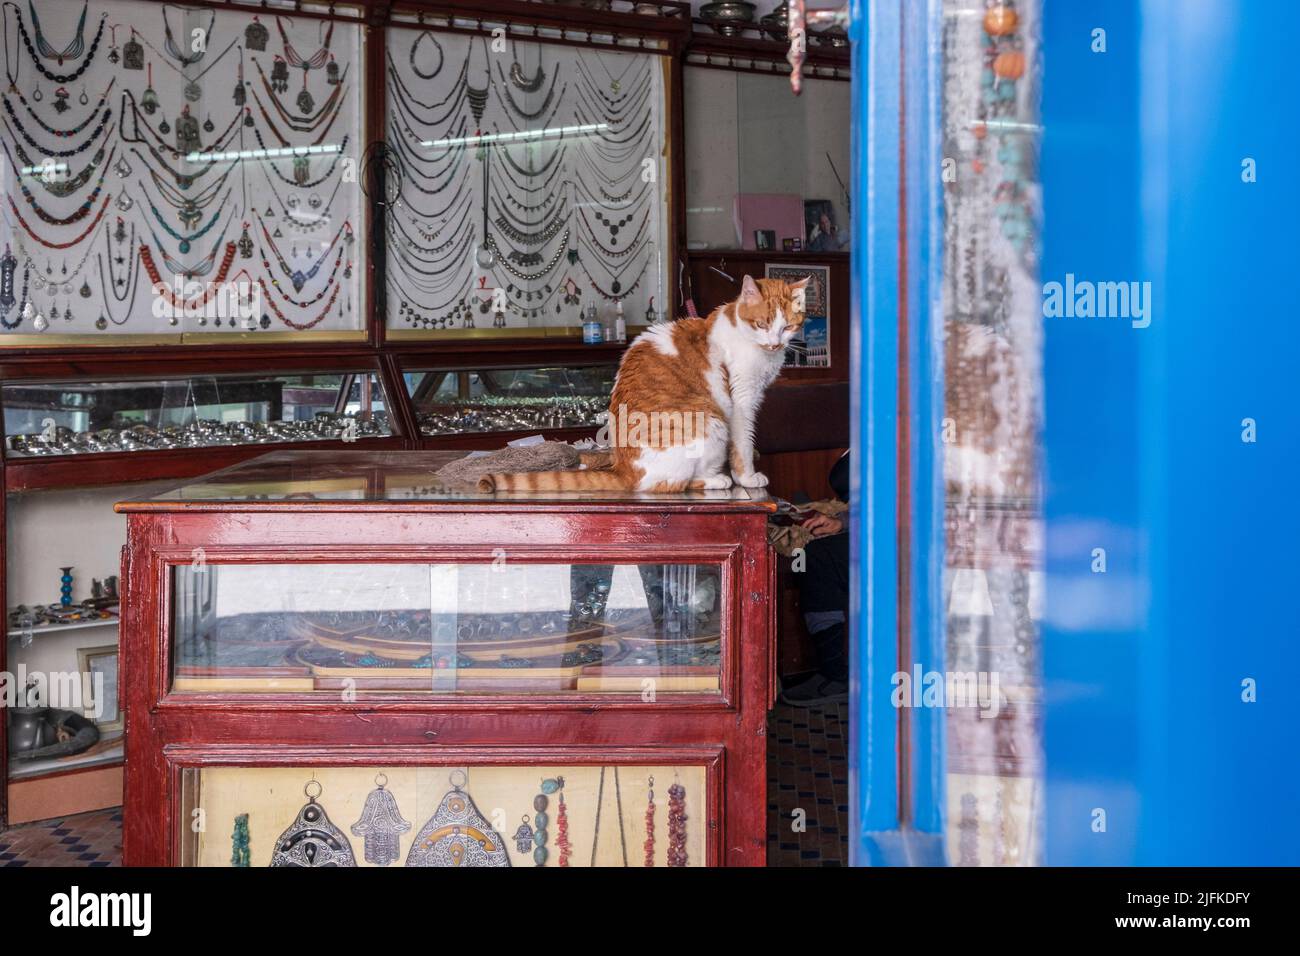 cat on the counter of a jewelry store, Surroundings of the Ben Youssef Mosque, Essaouira, morocco, africa. Stock Photo